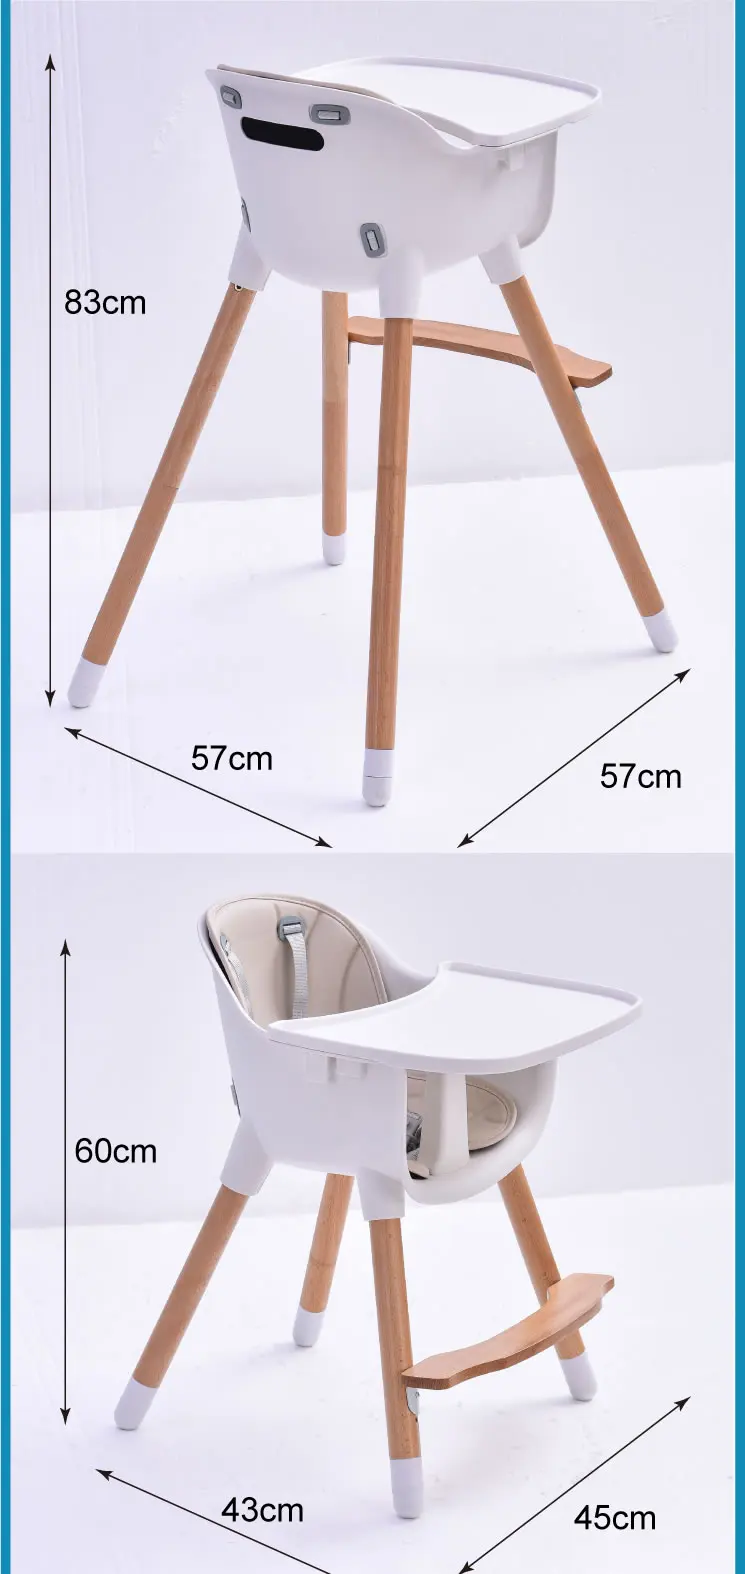 MH242 Baby High Chair Wooden High Chair with Removable Tray and Adjustable Legs for Baby Infants Toddlers